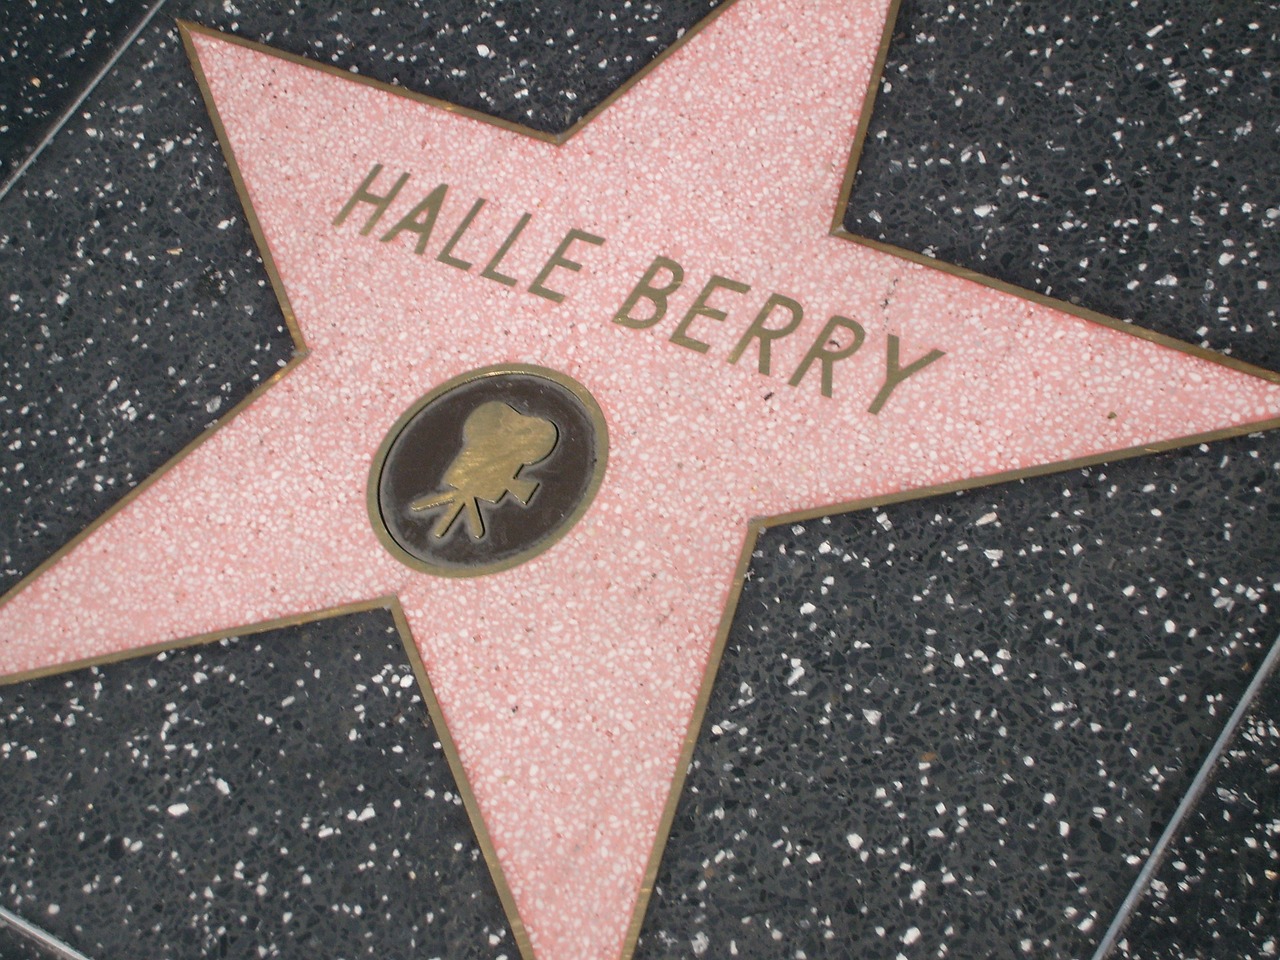 Halle Berry star on the Hollywood Walk of Fame